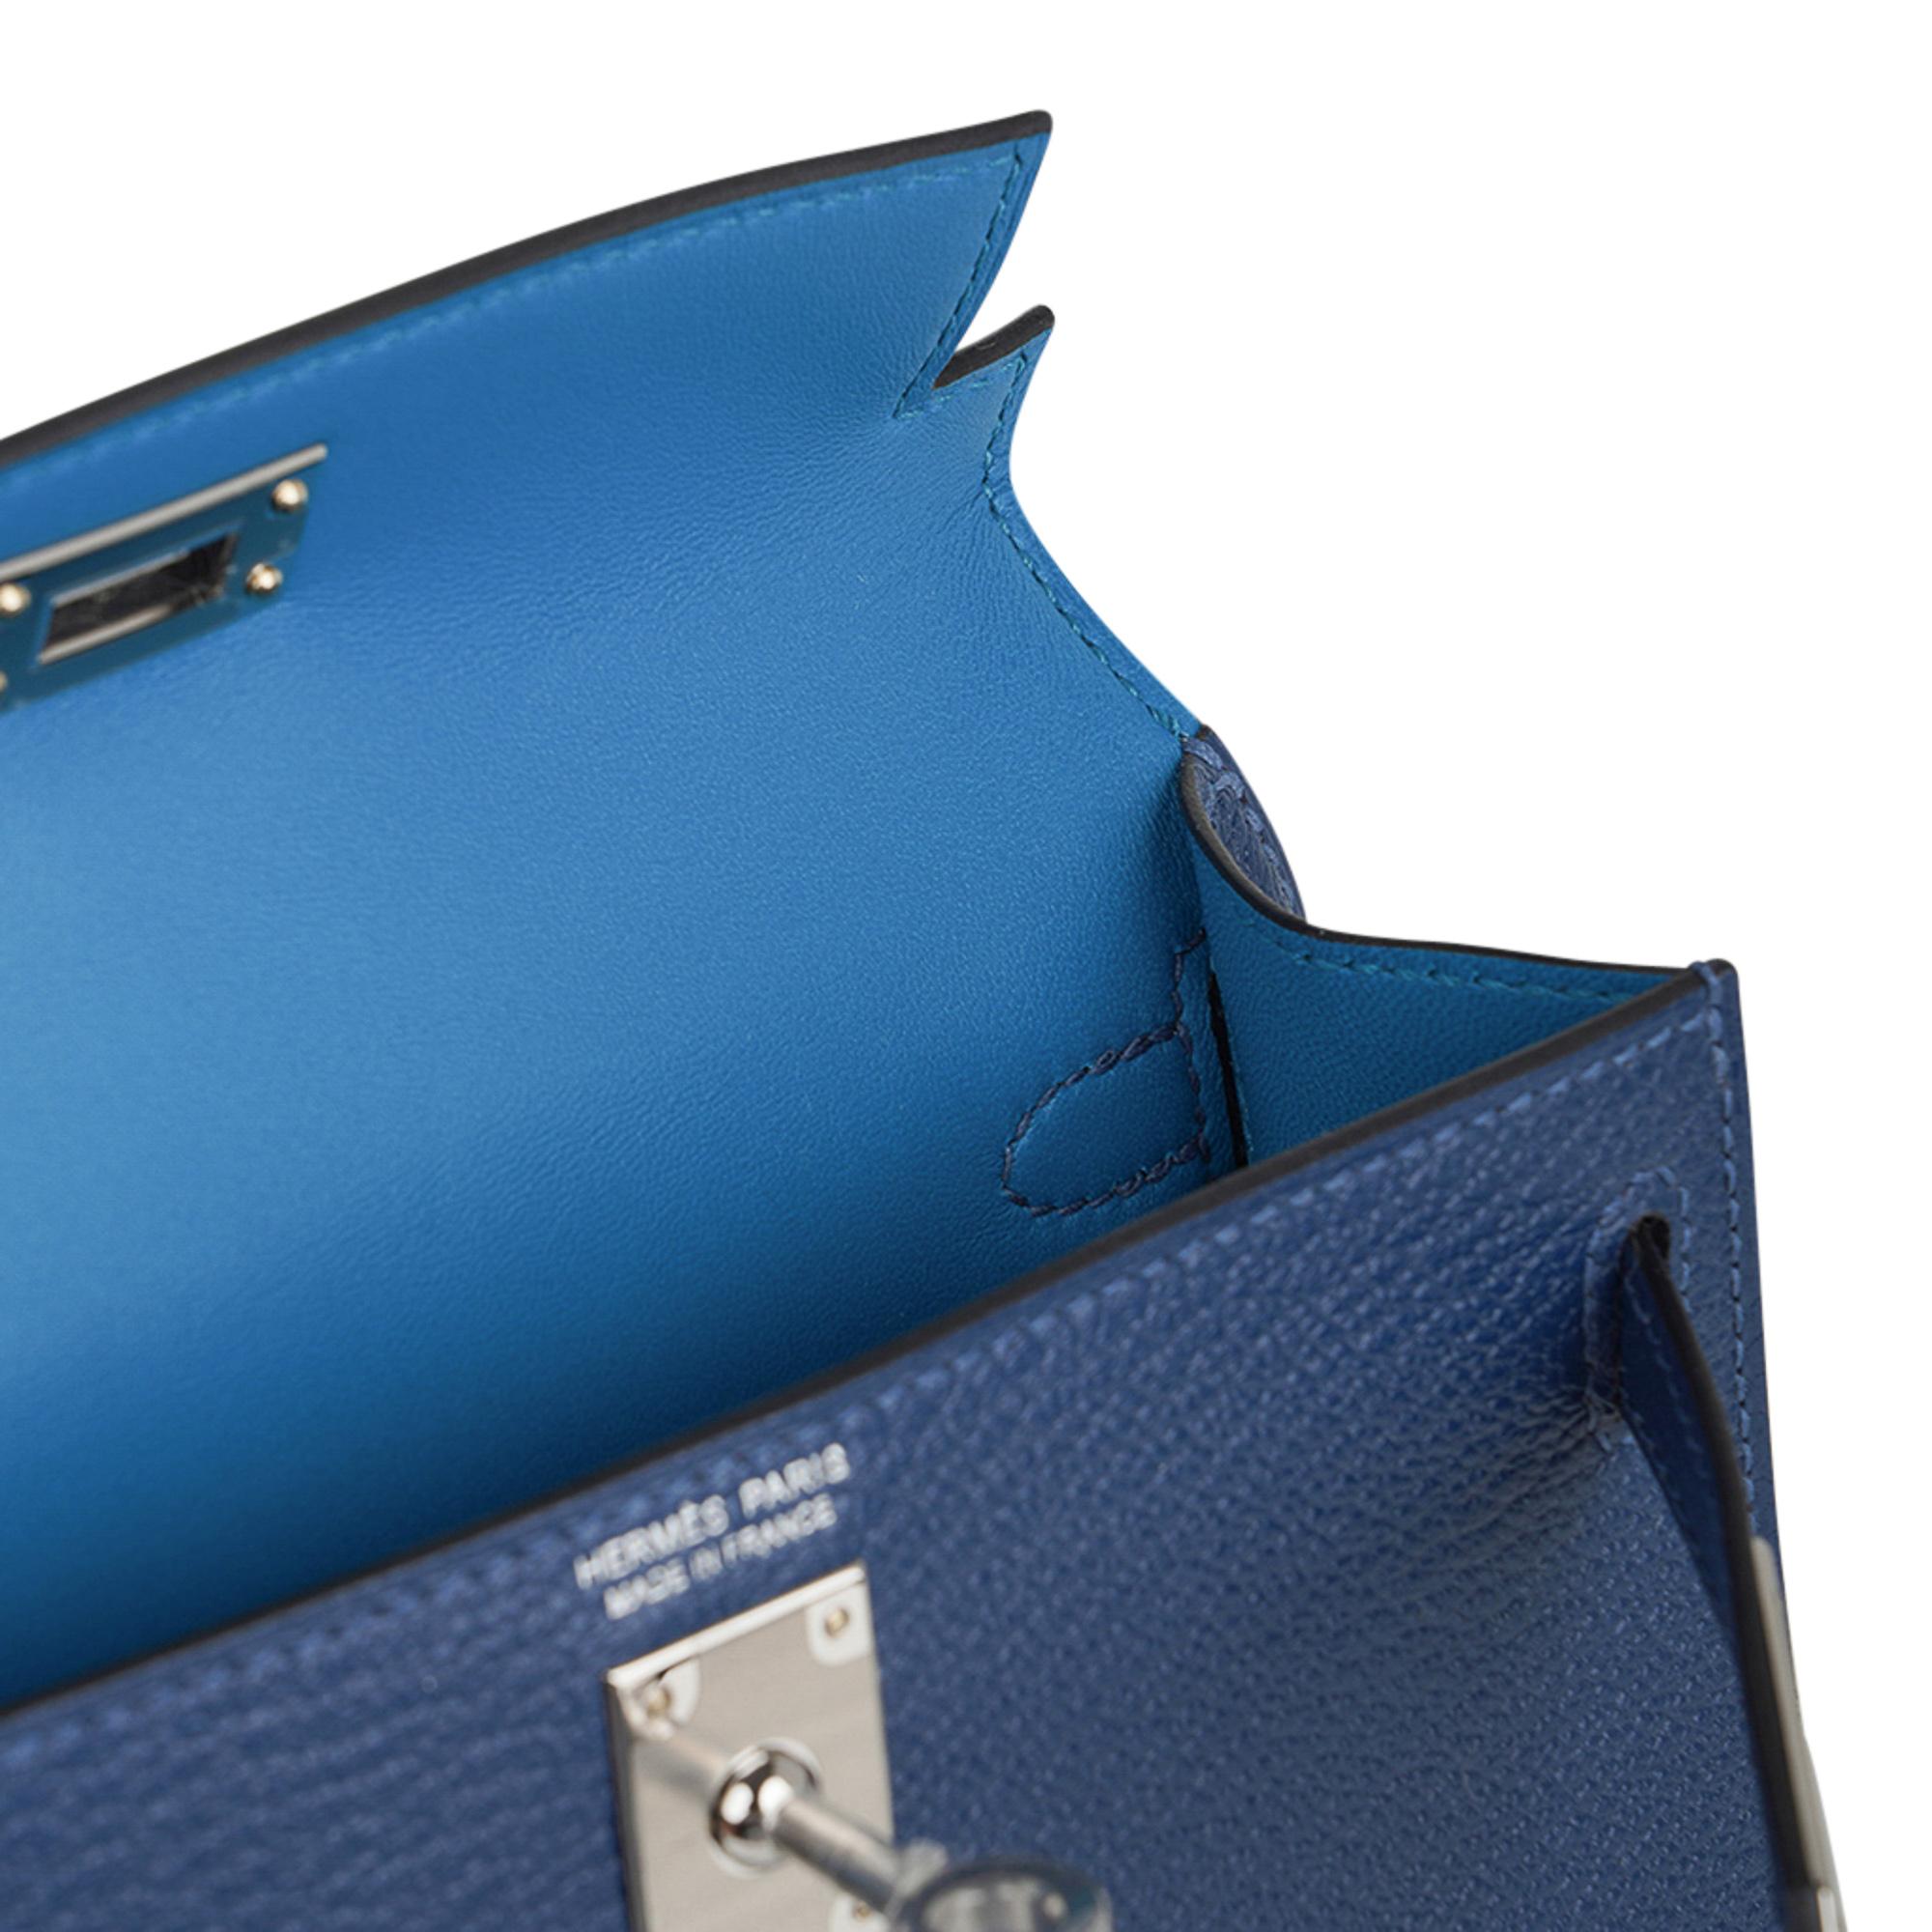 Mightychic offers an Hermes Kelly Verso 20 Mini Sellier bag featured in Deep Blue and Blue Izmir  interior..
Espom leather accentuated with Palladium hardware.
Comes with signature Hermes box, shoulder strap, and sleeper.
Please see the extensive